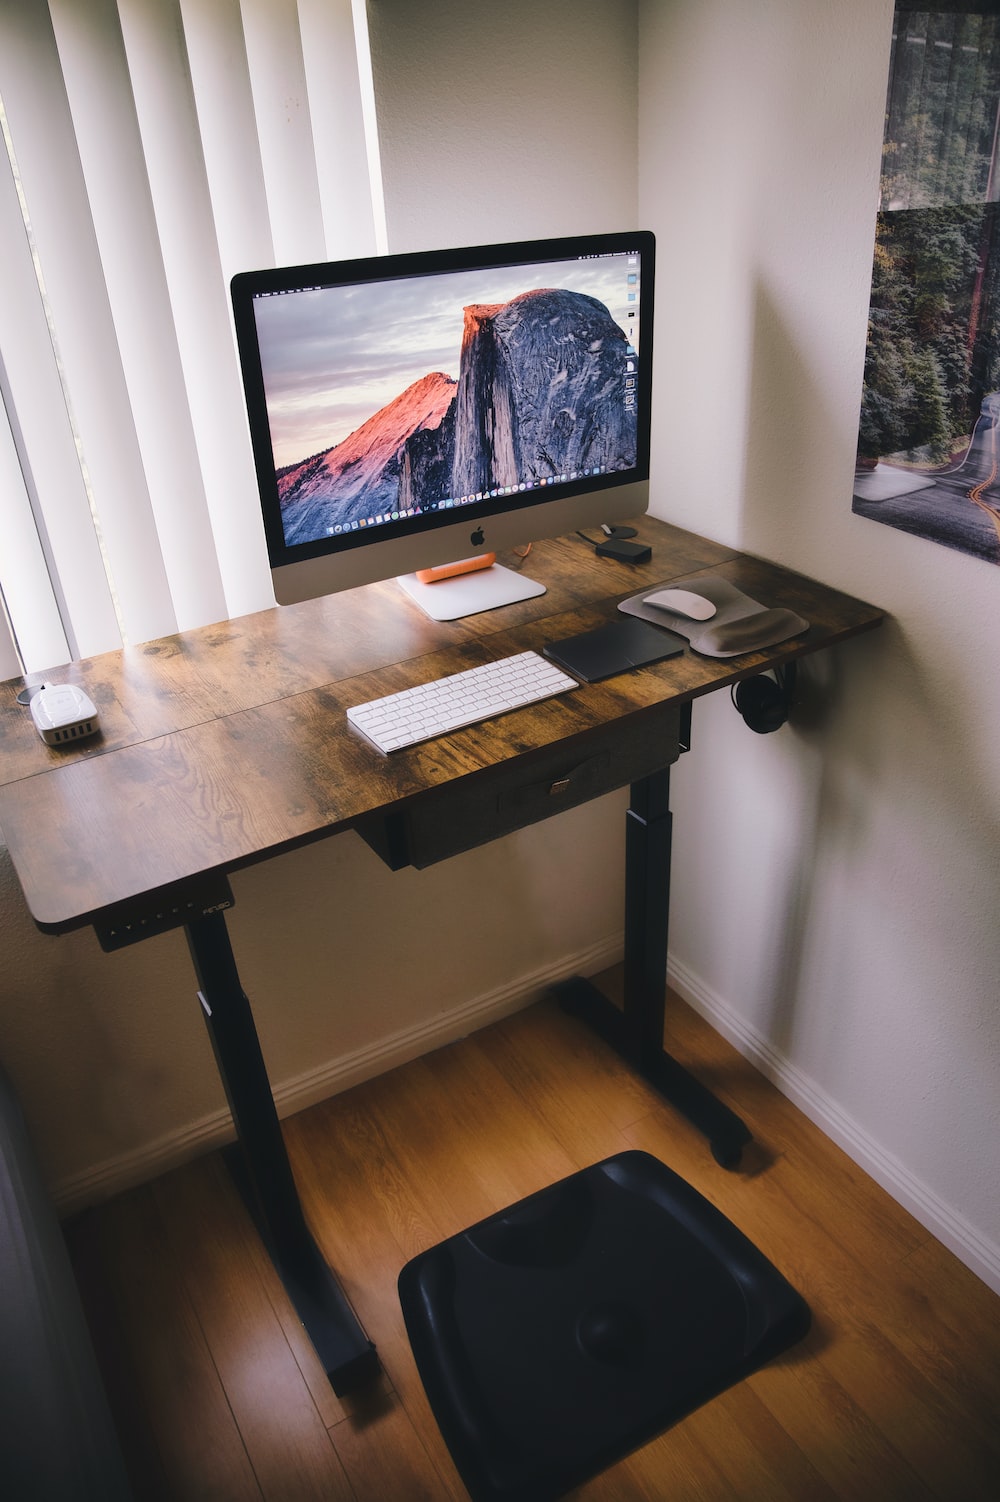 Is desk better than table?